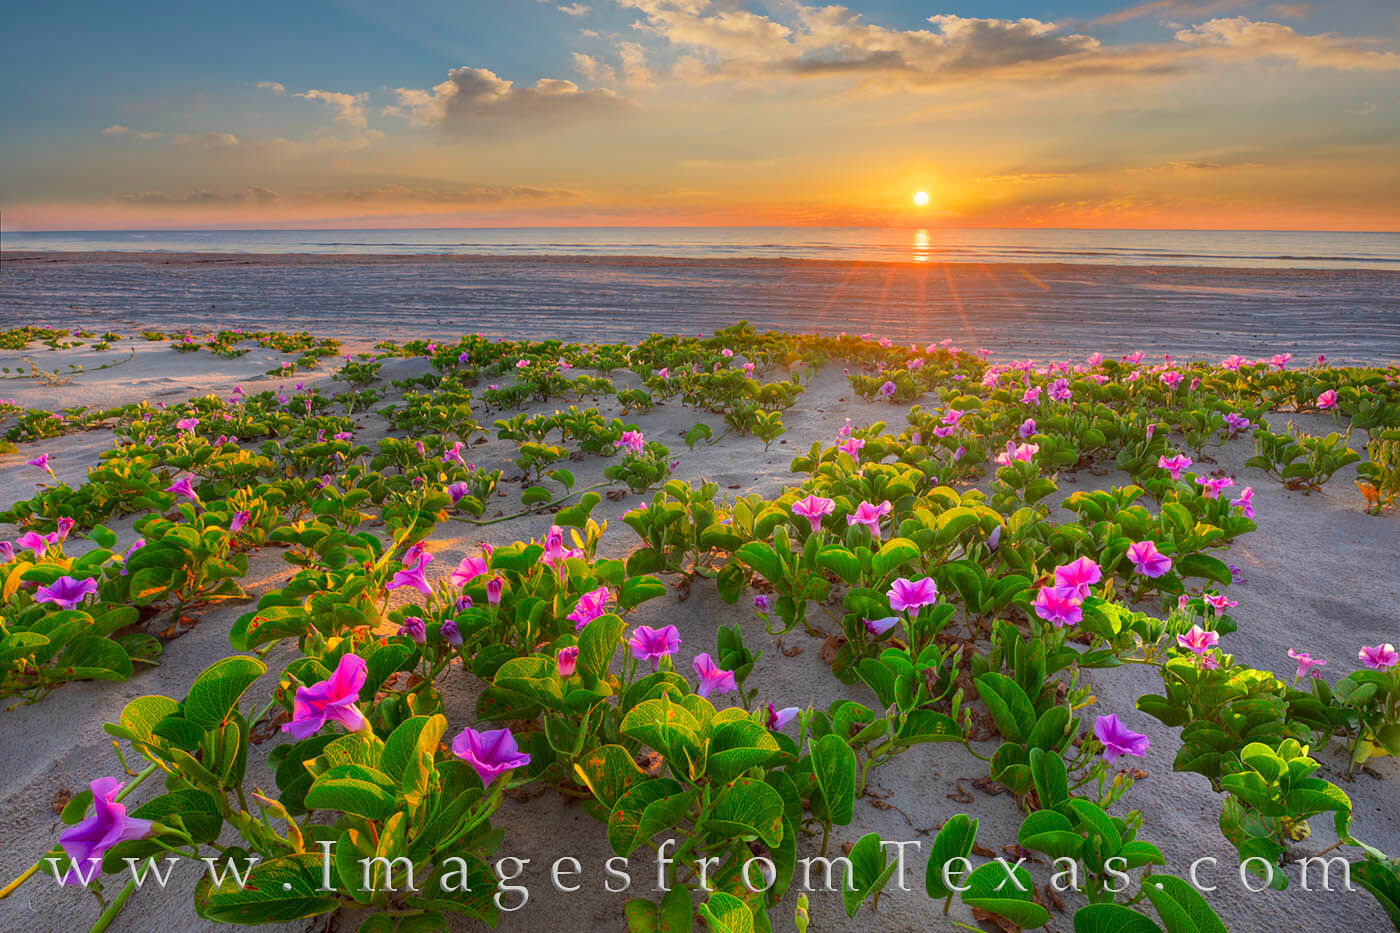 Morning Glories bloom in the early morning light on the beaches of South Padre Island.